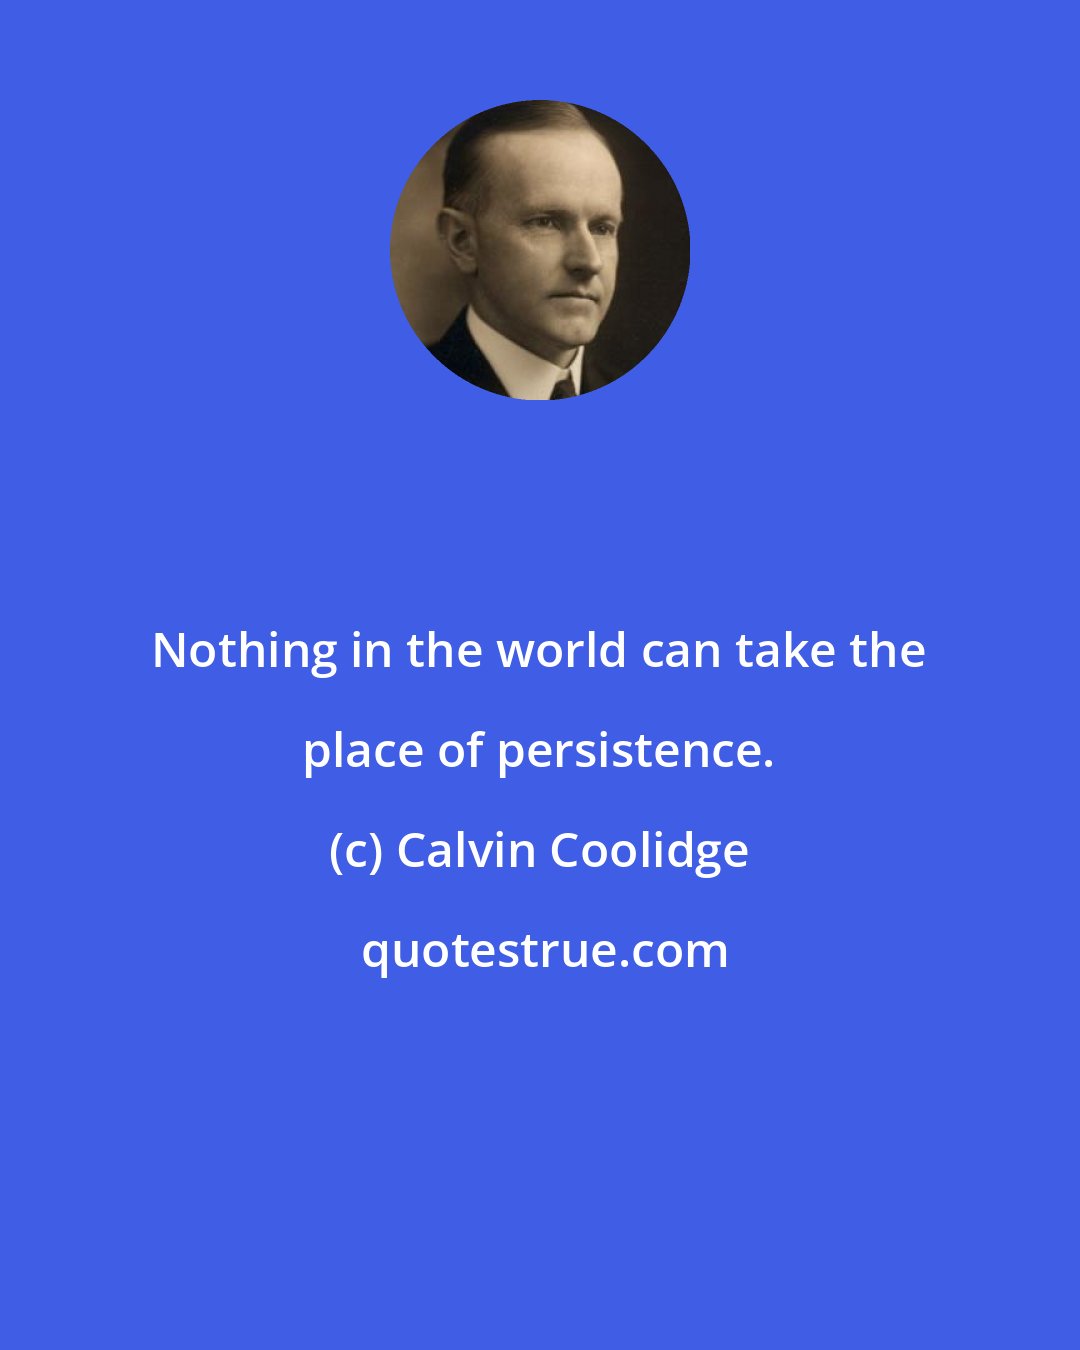 Calvin Coolidge: Nothing in the world can take the place of persistence.